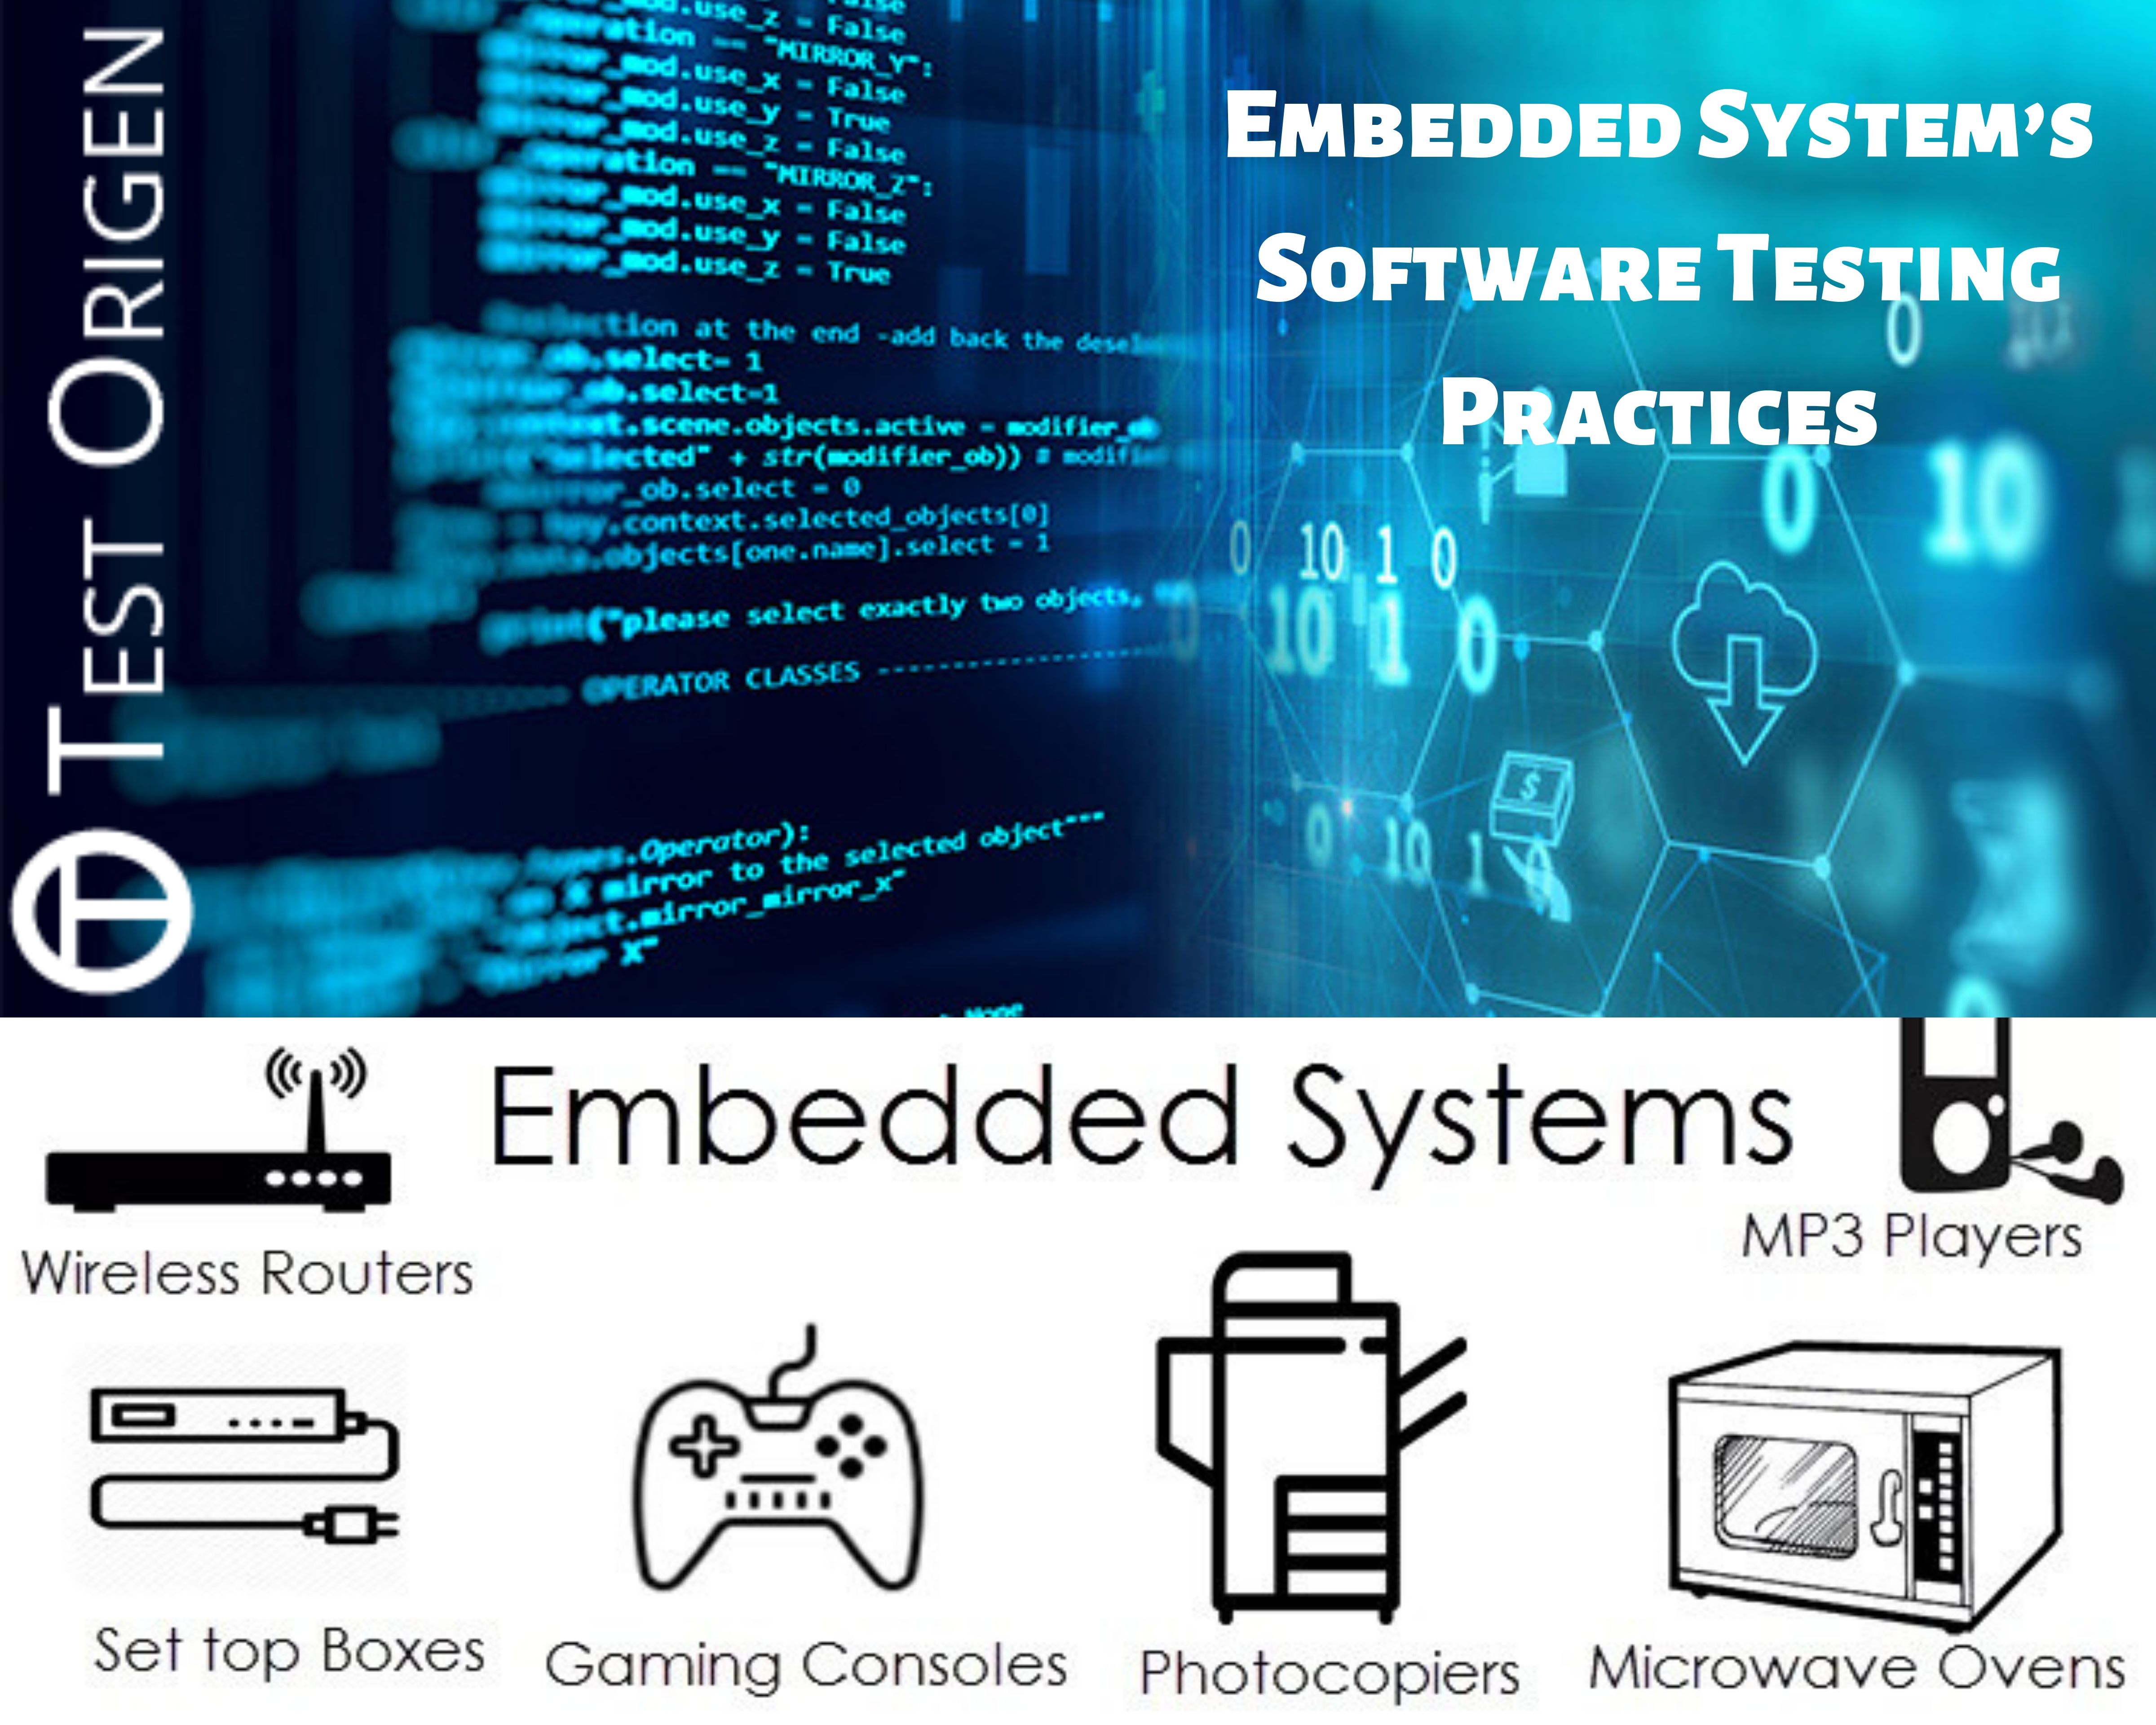 Embedded System’s Software Testing Practices